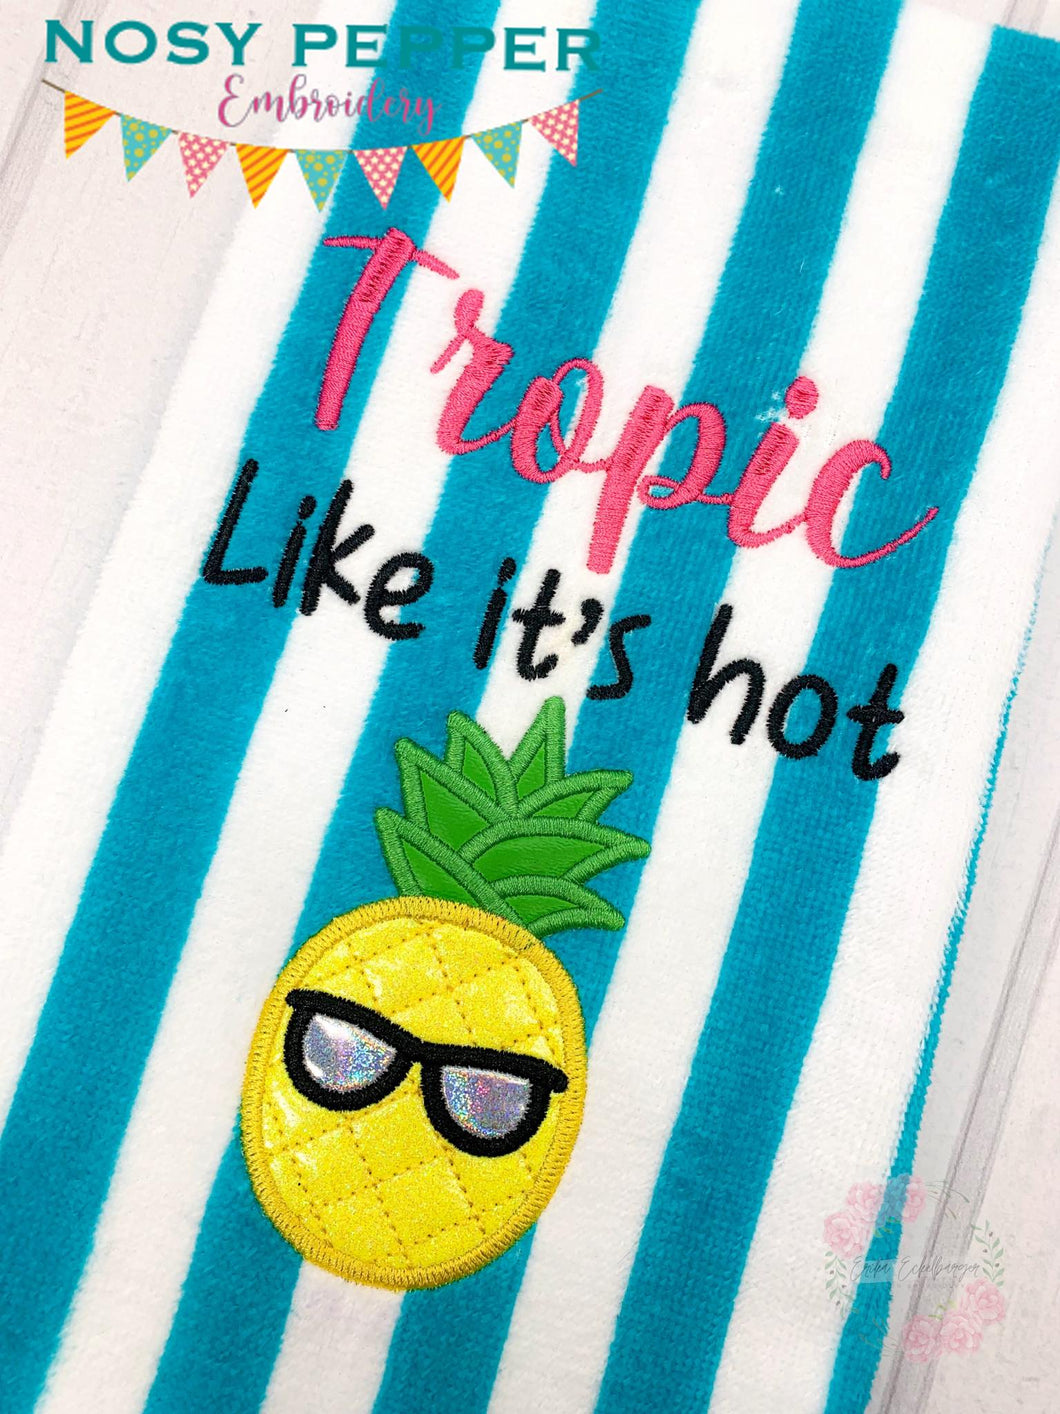 Tropic like it's hot applique machine embroidery design (4 sizes included) DIGITAL DOWNLOAD